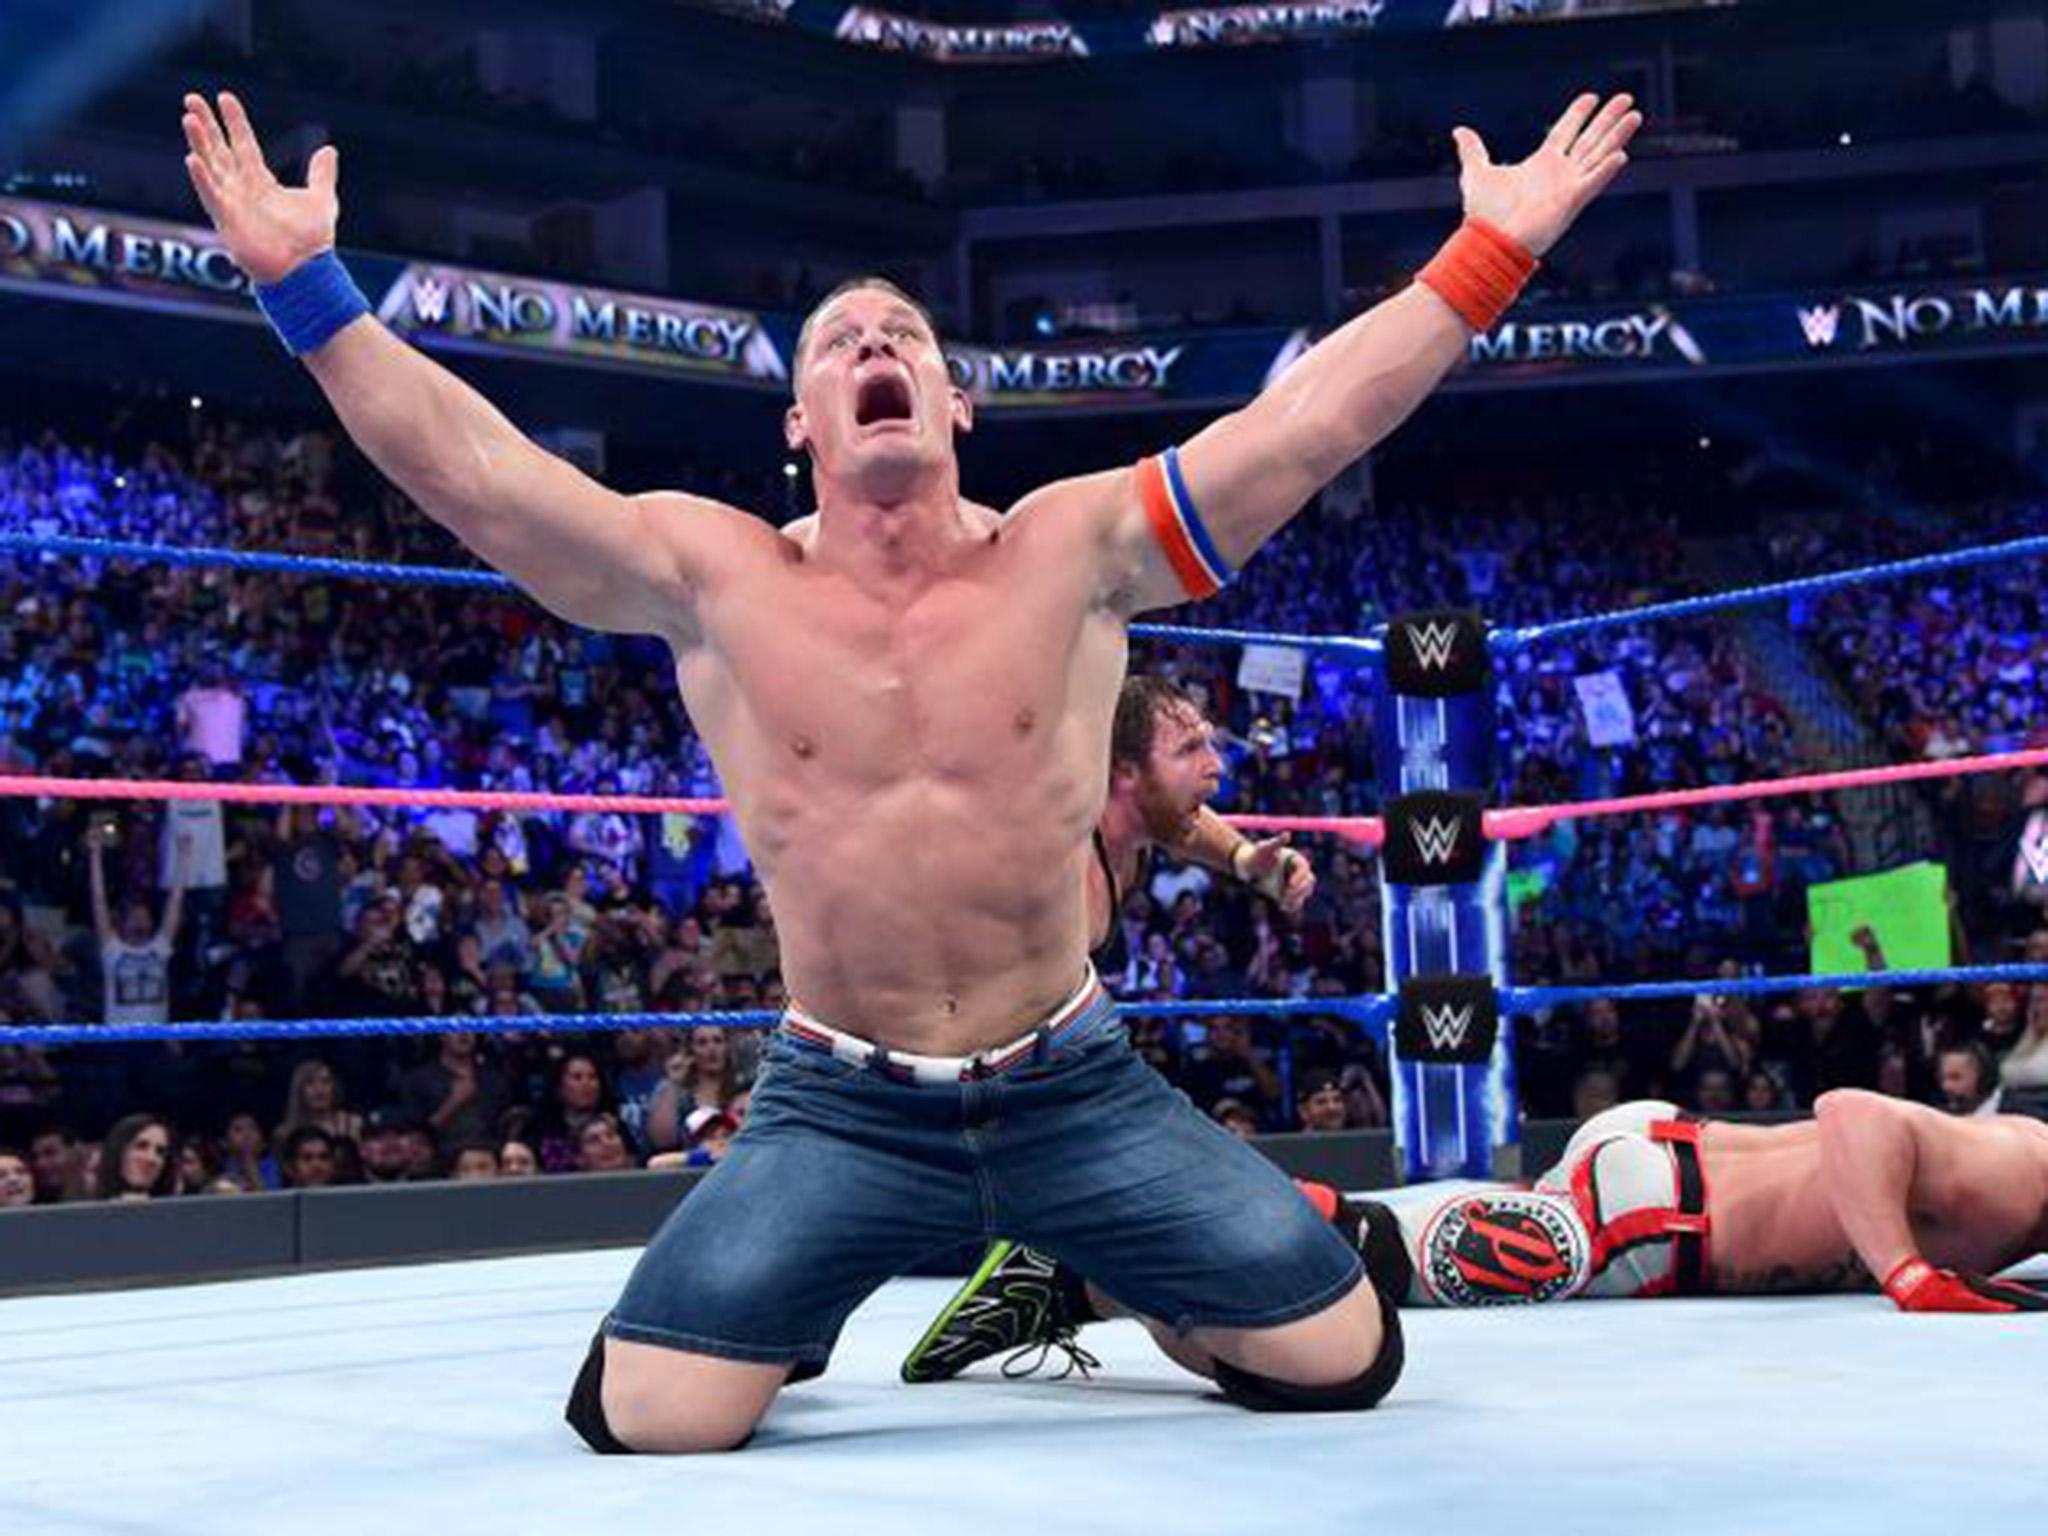 WWE No Mercy results: AJ Styles retains title